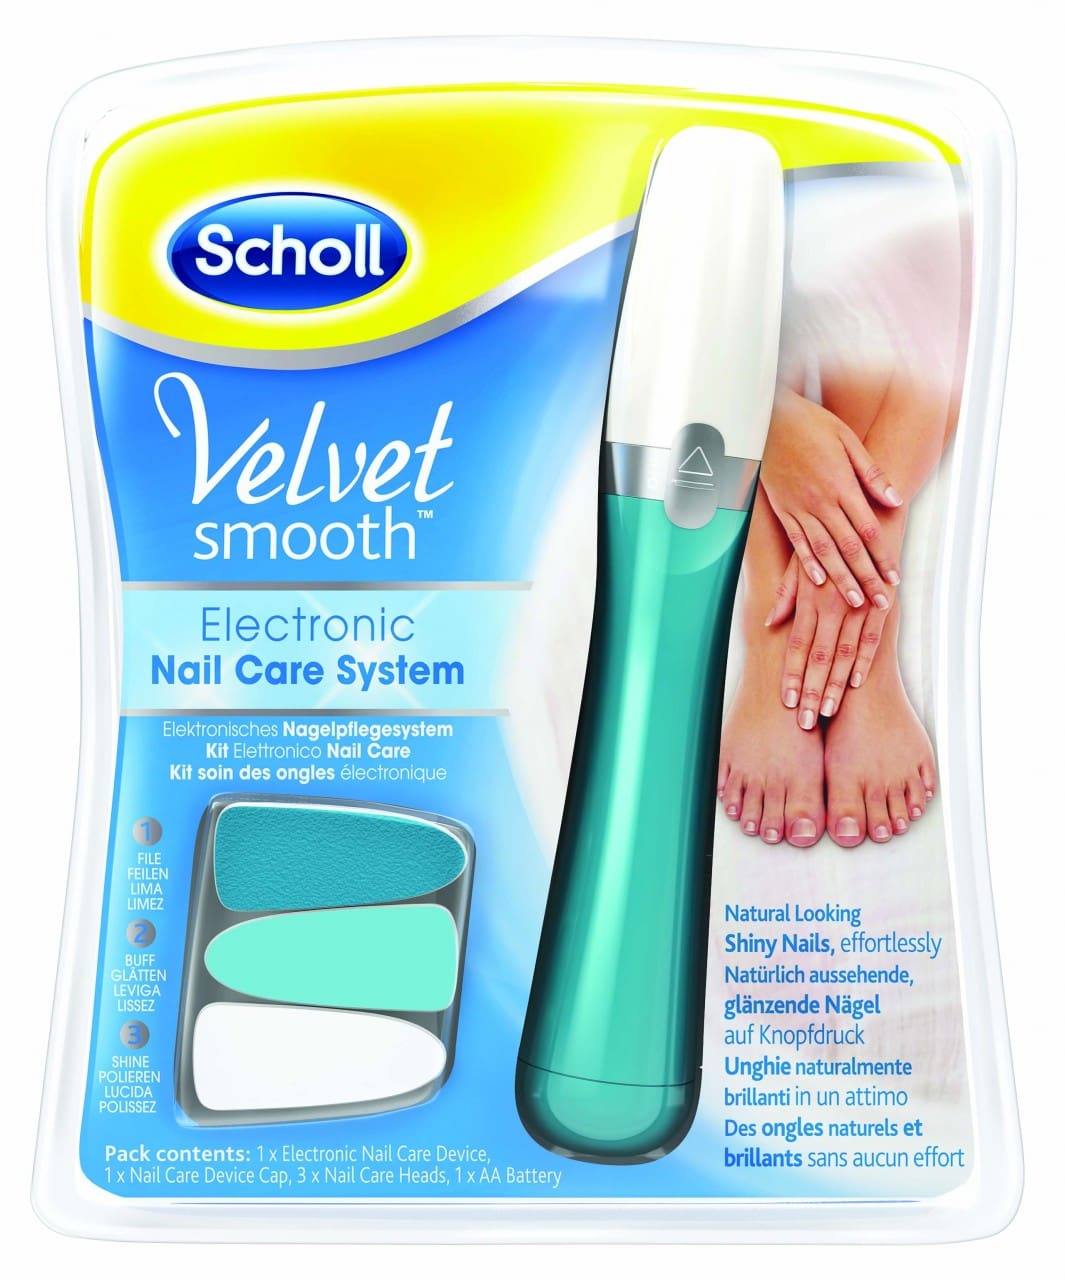 Post maag Actie Healthy Nails At Home With Scholl's Velvet Smooth Electronic Nail Care  System – Lipstiq.com